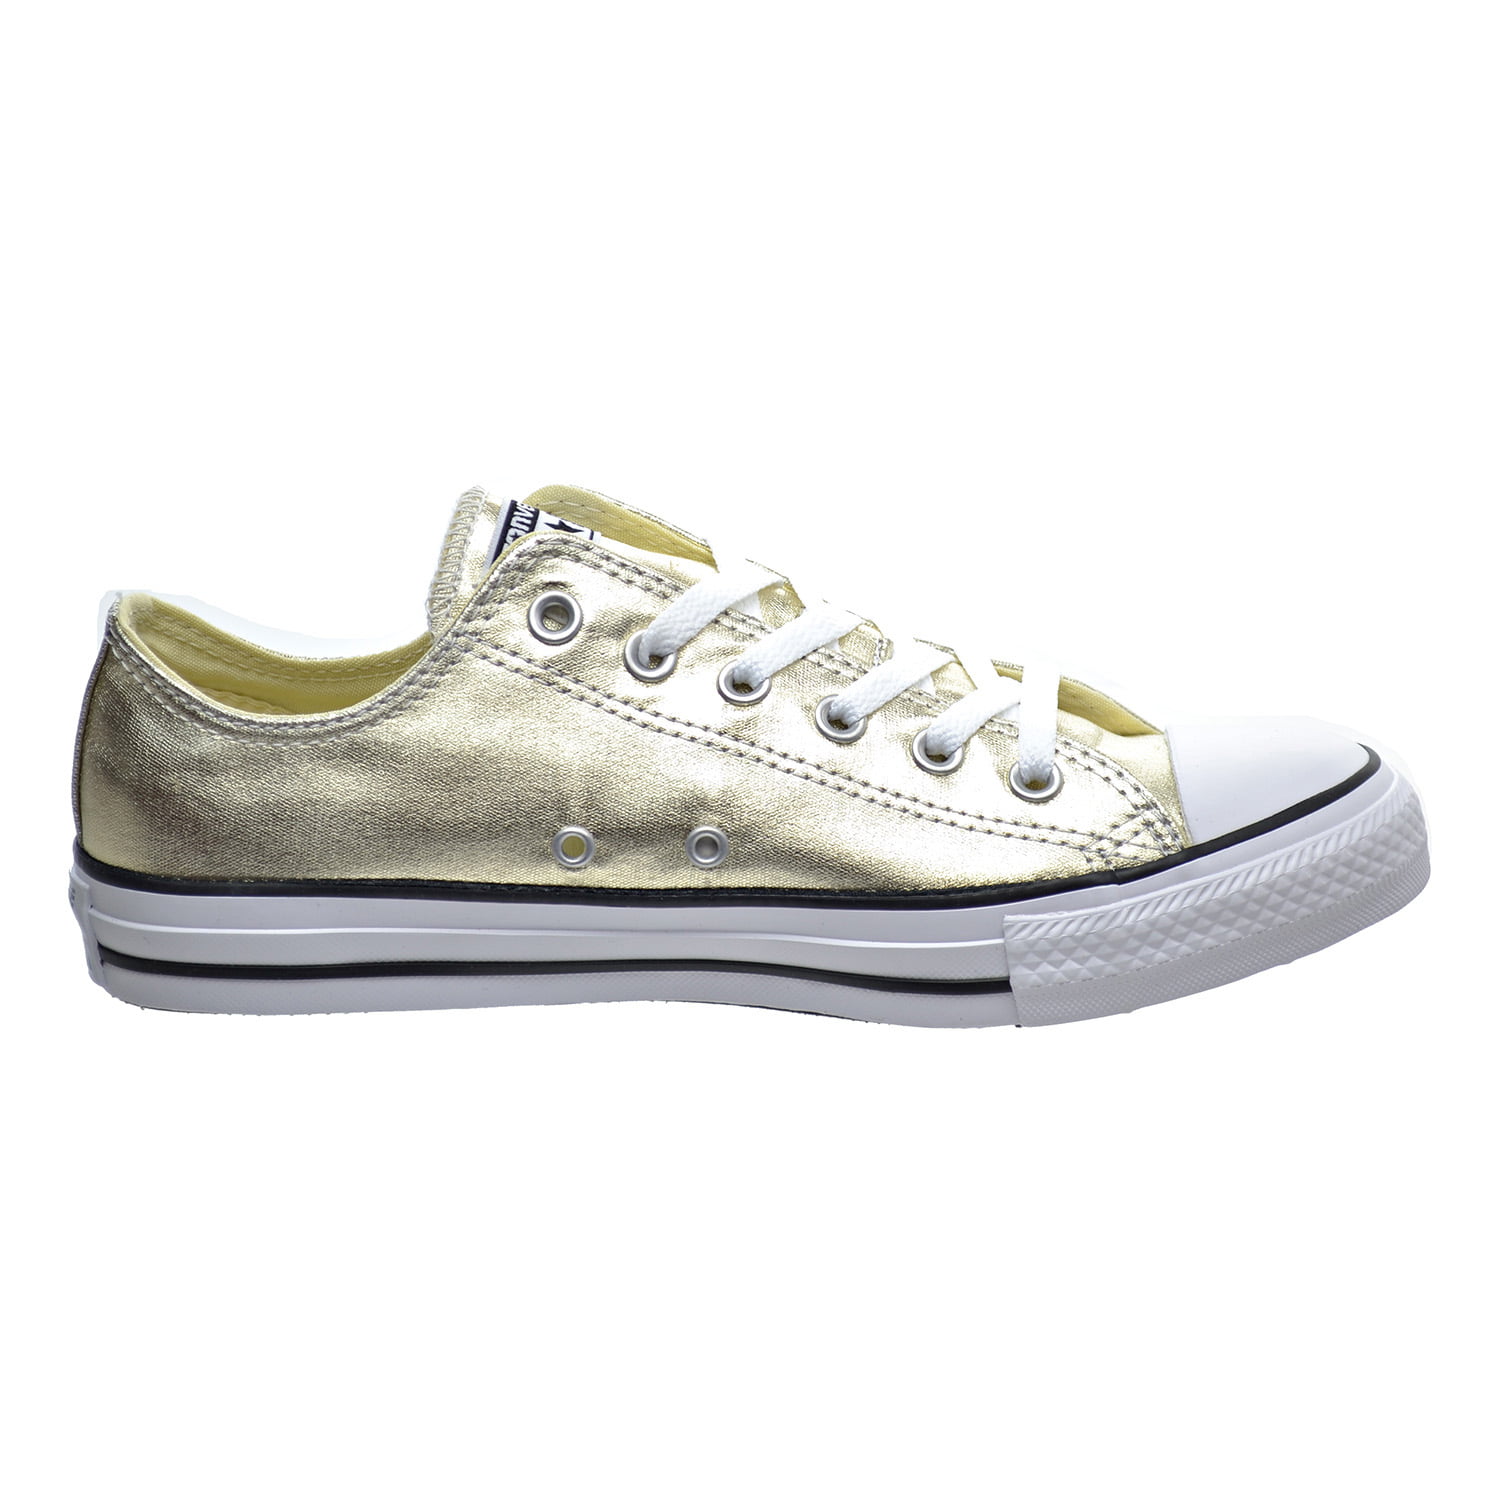 Converse Chuck Taylor All Star OX Unisex Shoes Light Gold/White153181f -  